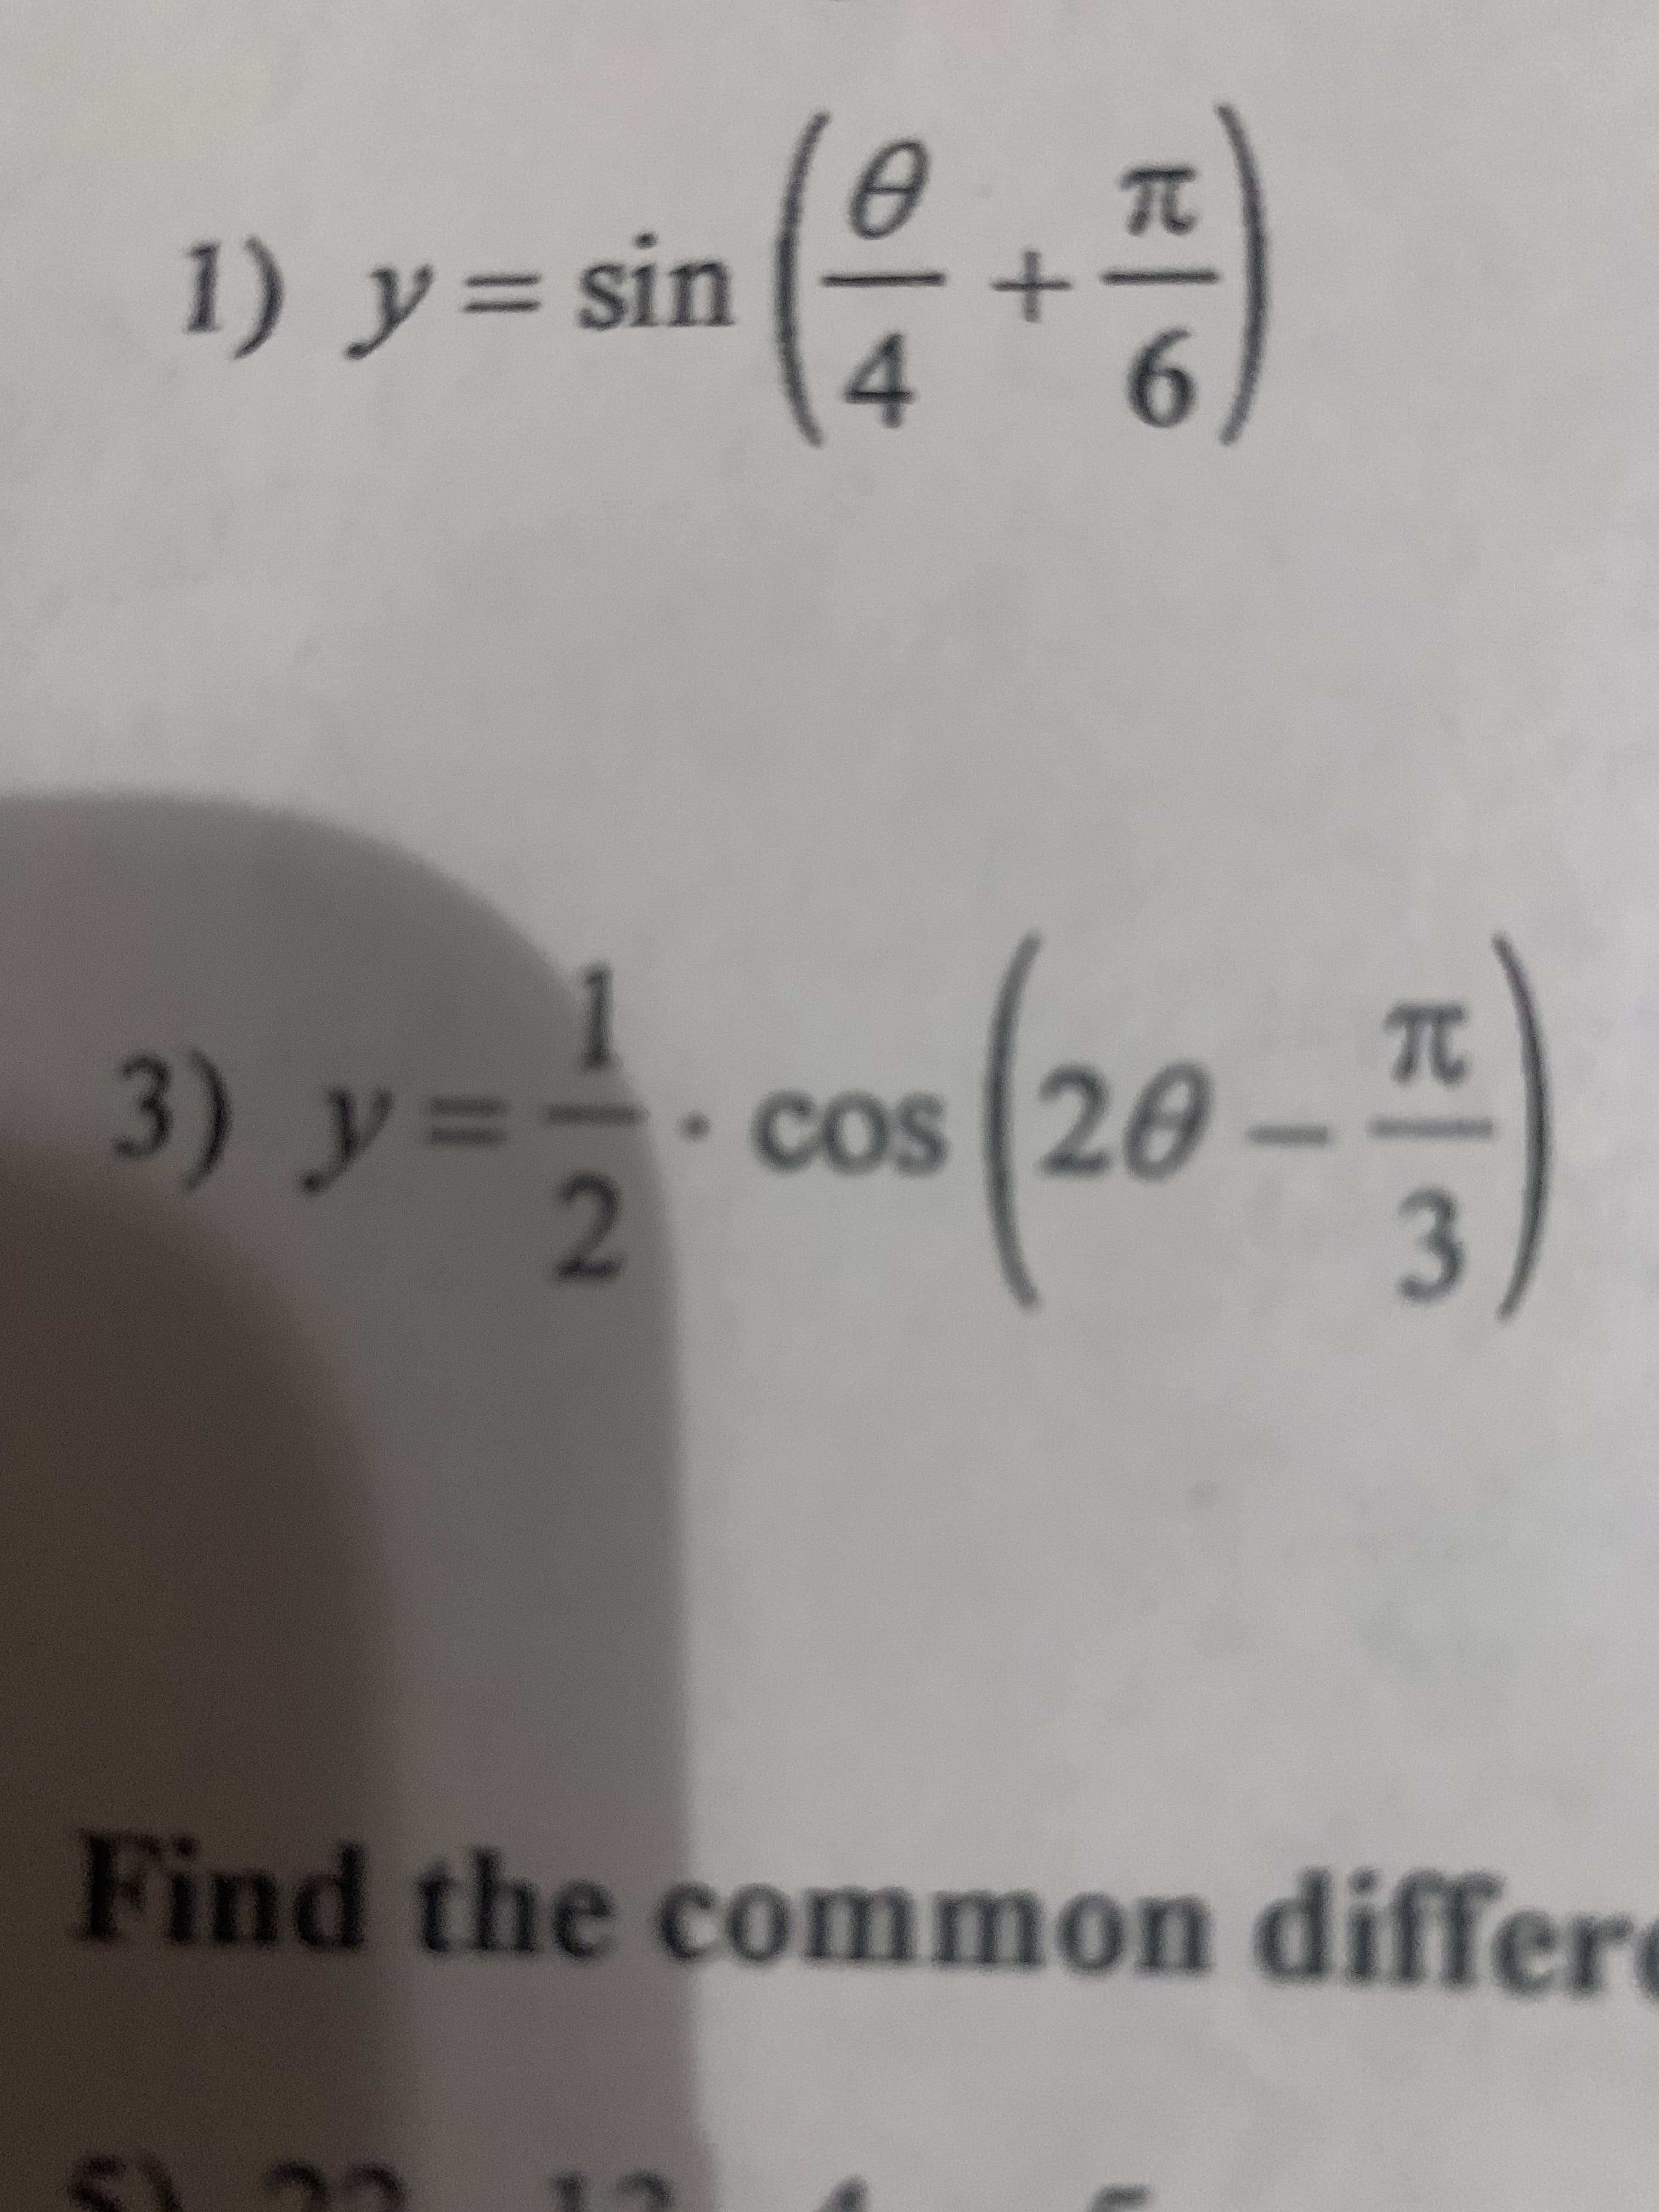 1) y= sin
%3D
9.
3) y=
20
cos
%3D
2.
Find the common differe
